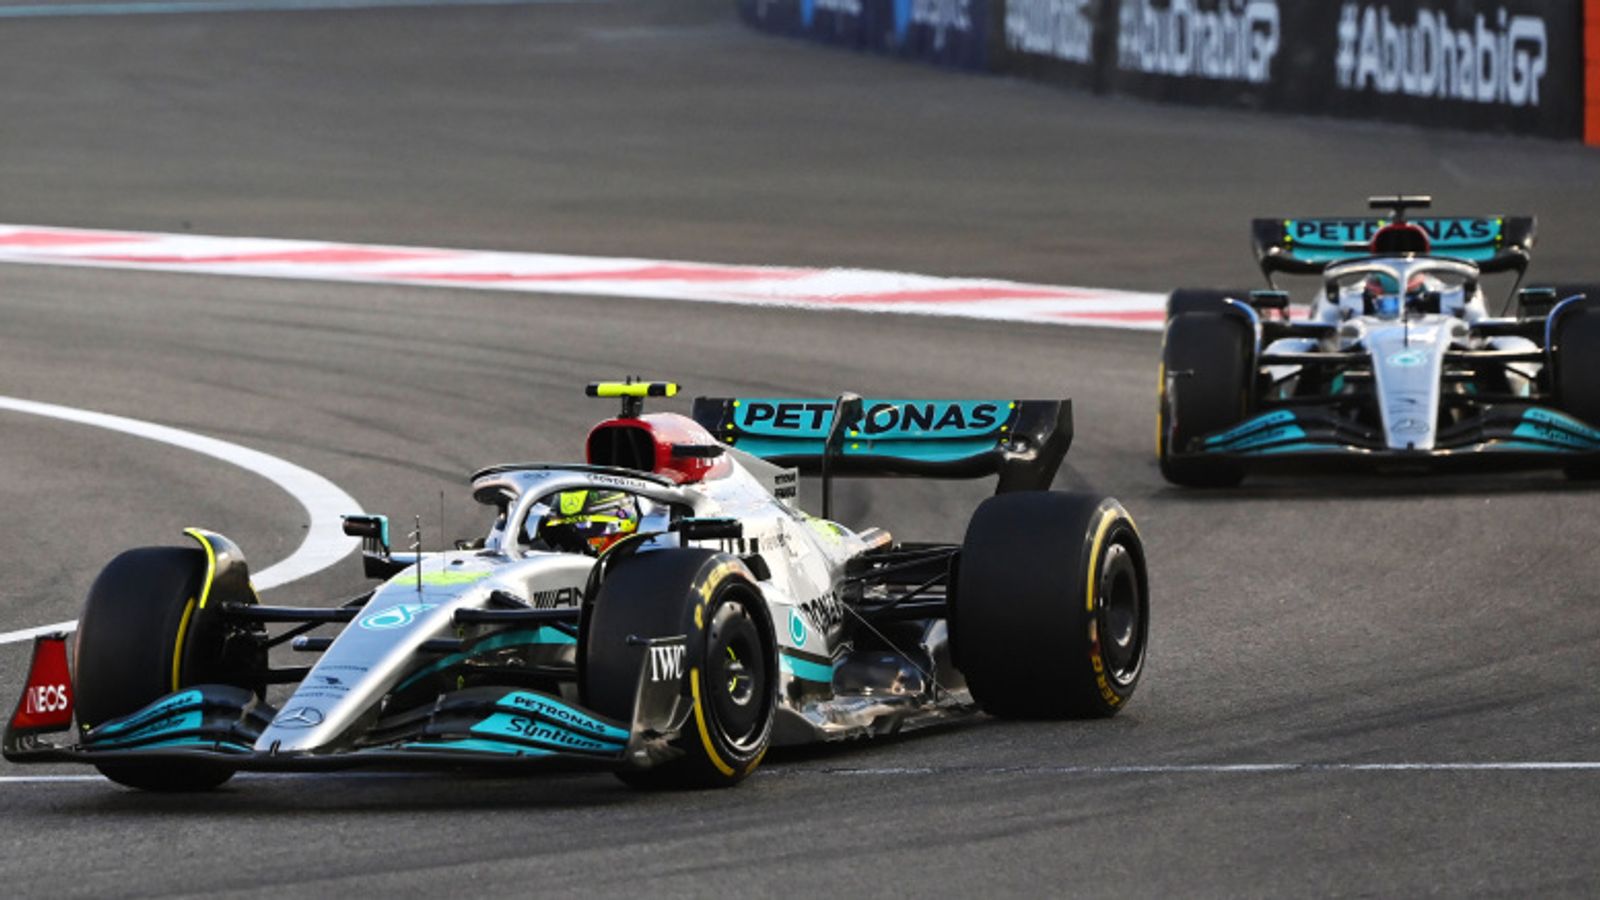 Mercedes chief Toto Wolff hopes 2023 W14 car can develop faster than Red Bull and Ferrari